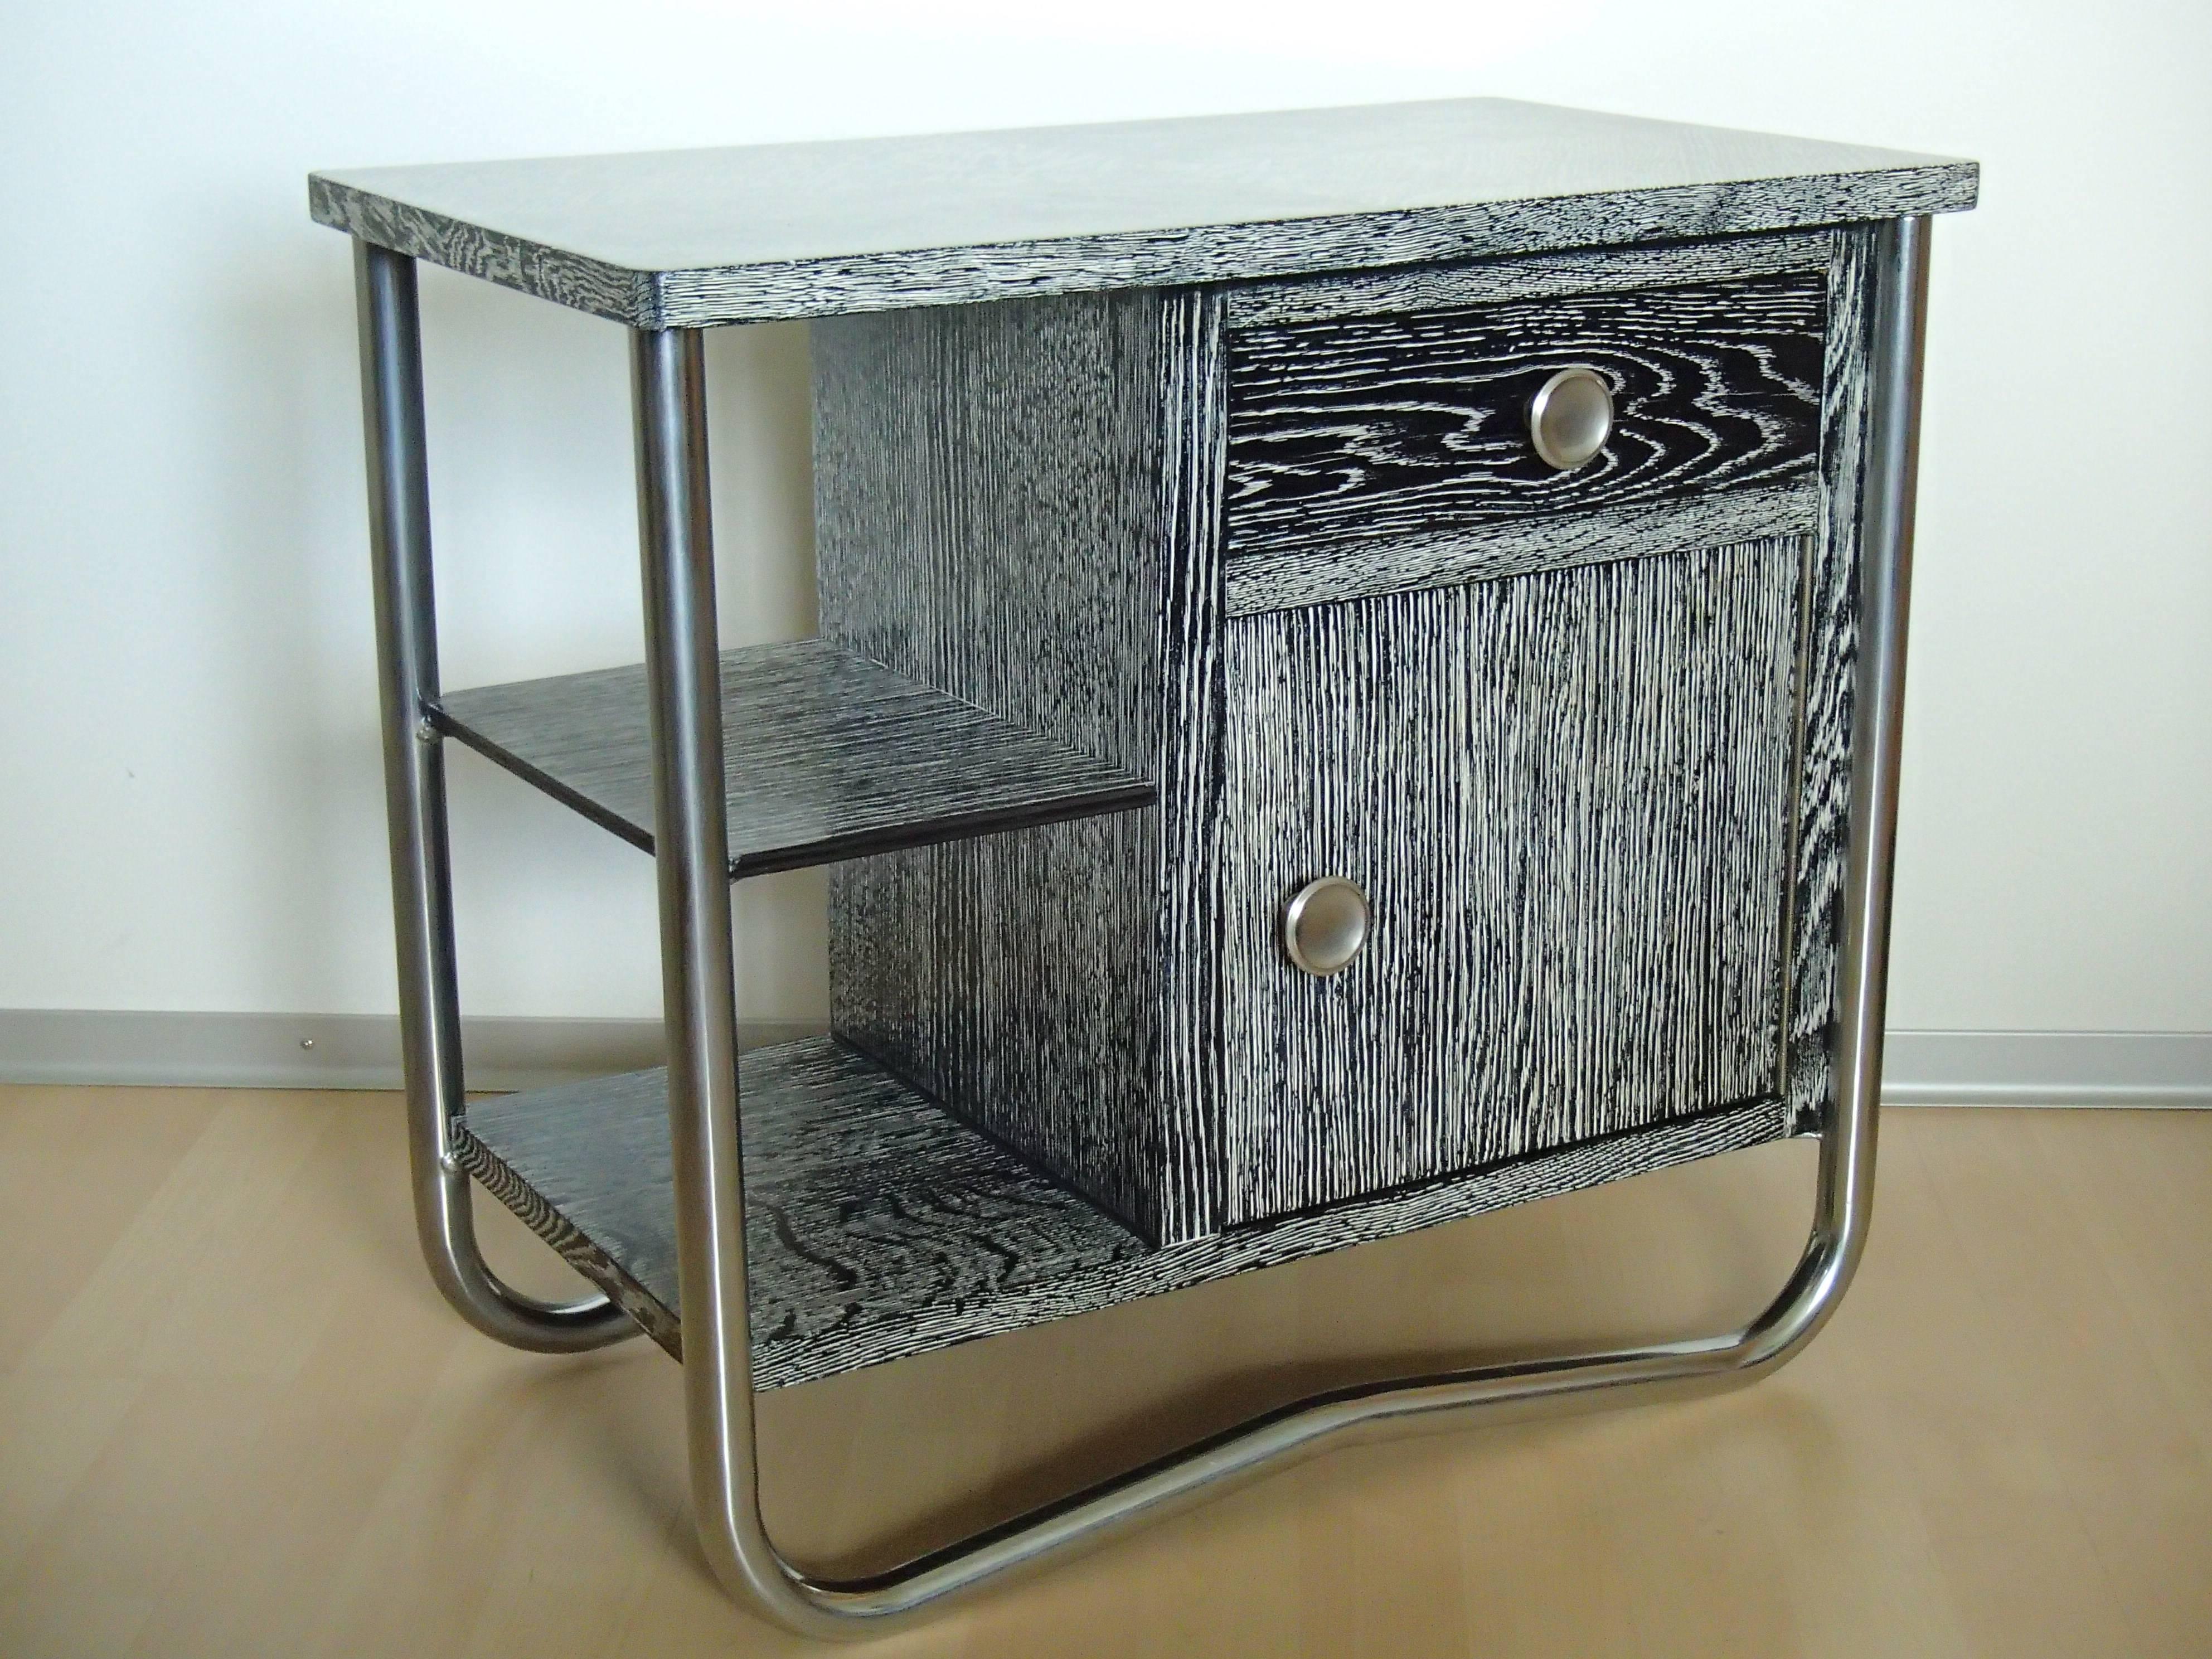 Bauhaus Art Deco side table cabinet cerused black and white oak and chrome completely
restored.